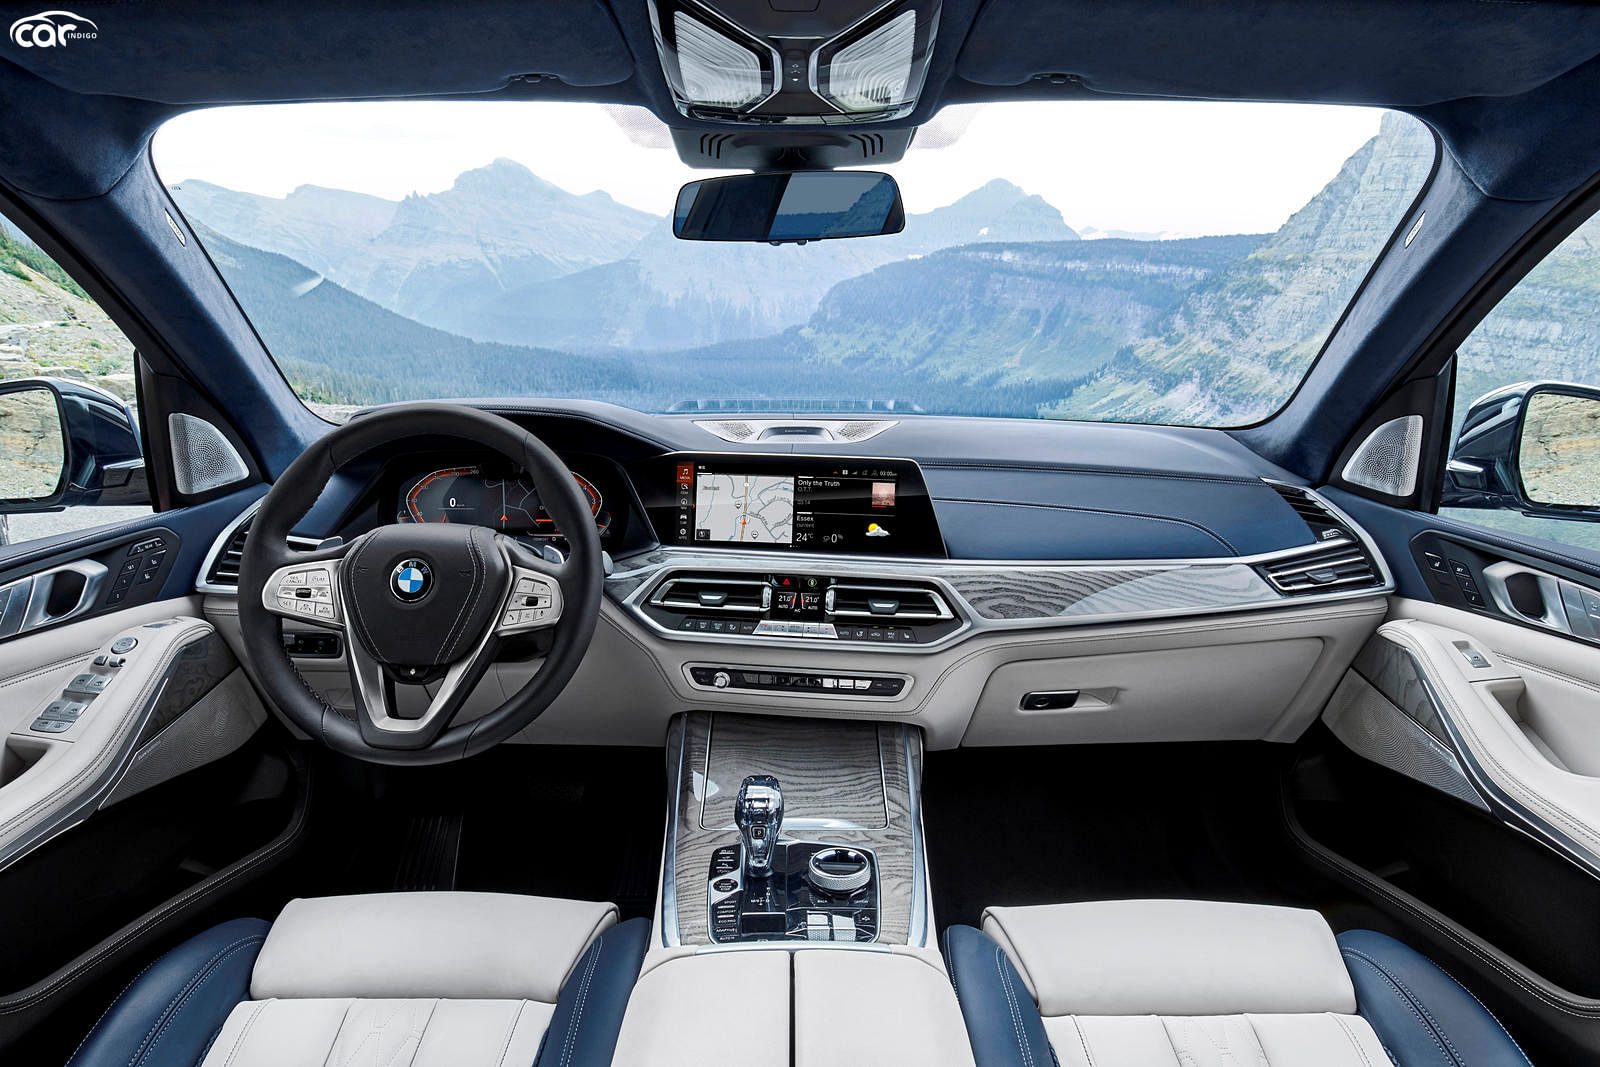 Decoration Innocence procedure 2022 BMW X7 Interior Review - Seating, Infotainment, Dashboard and Features  | CarIndigo.com